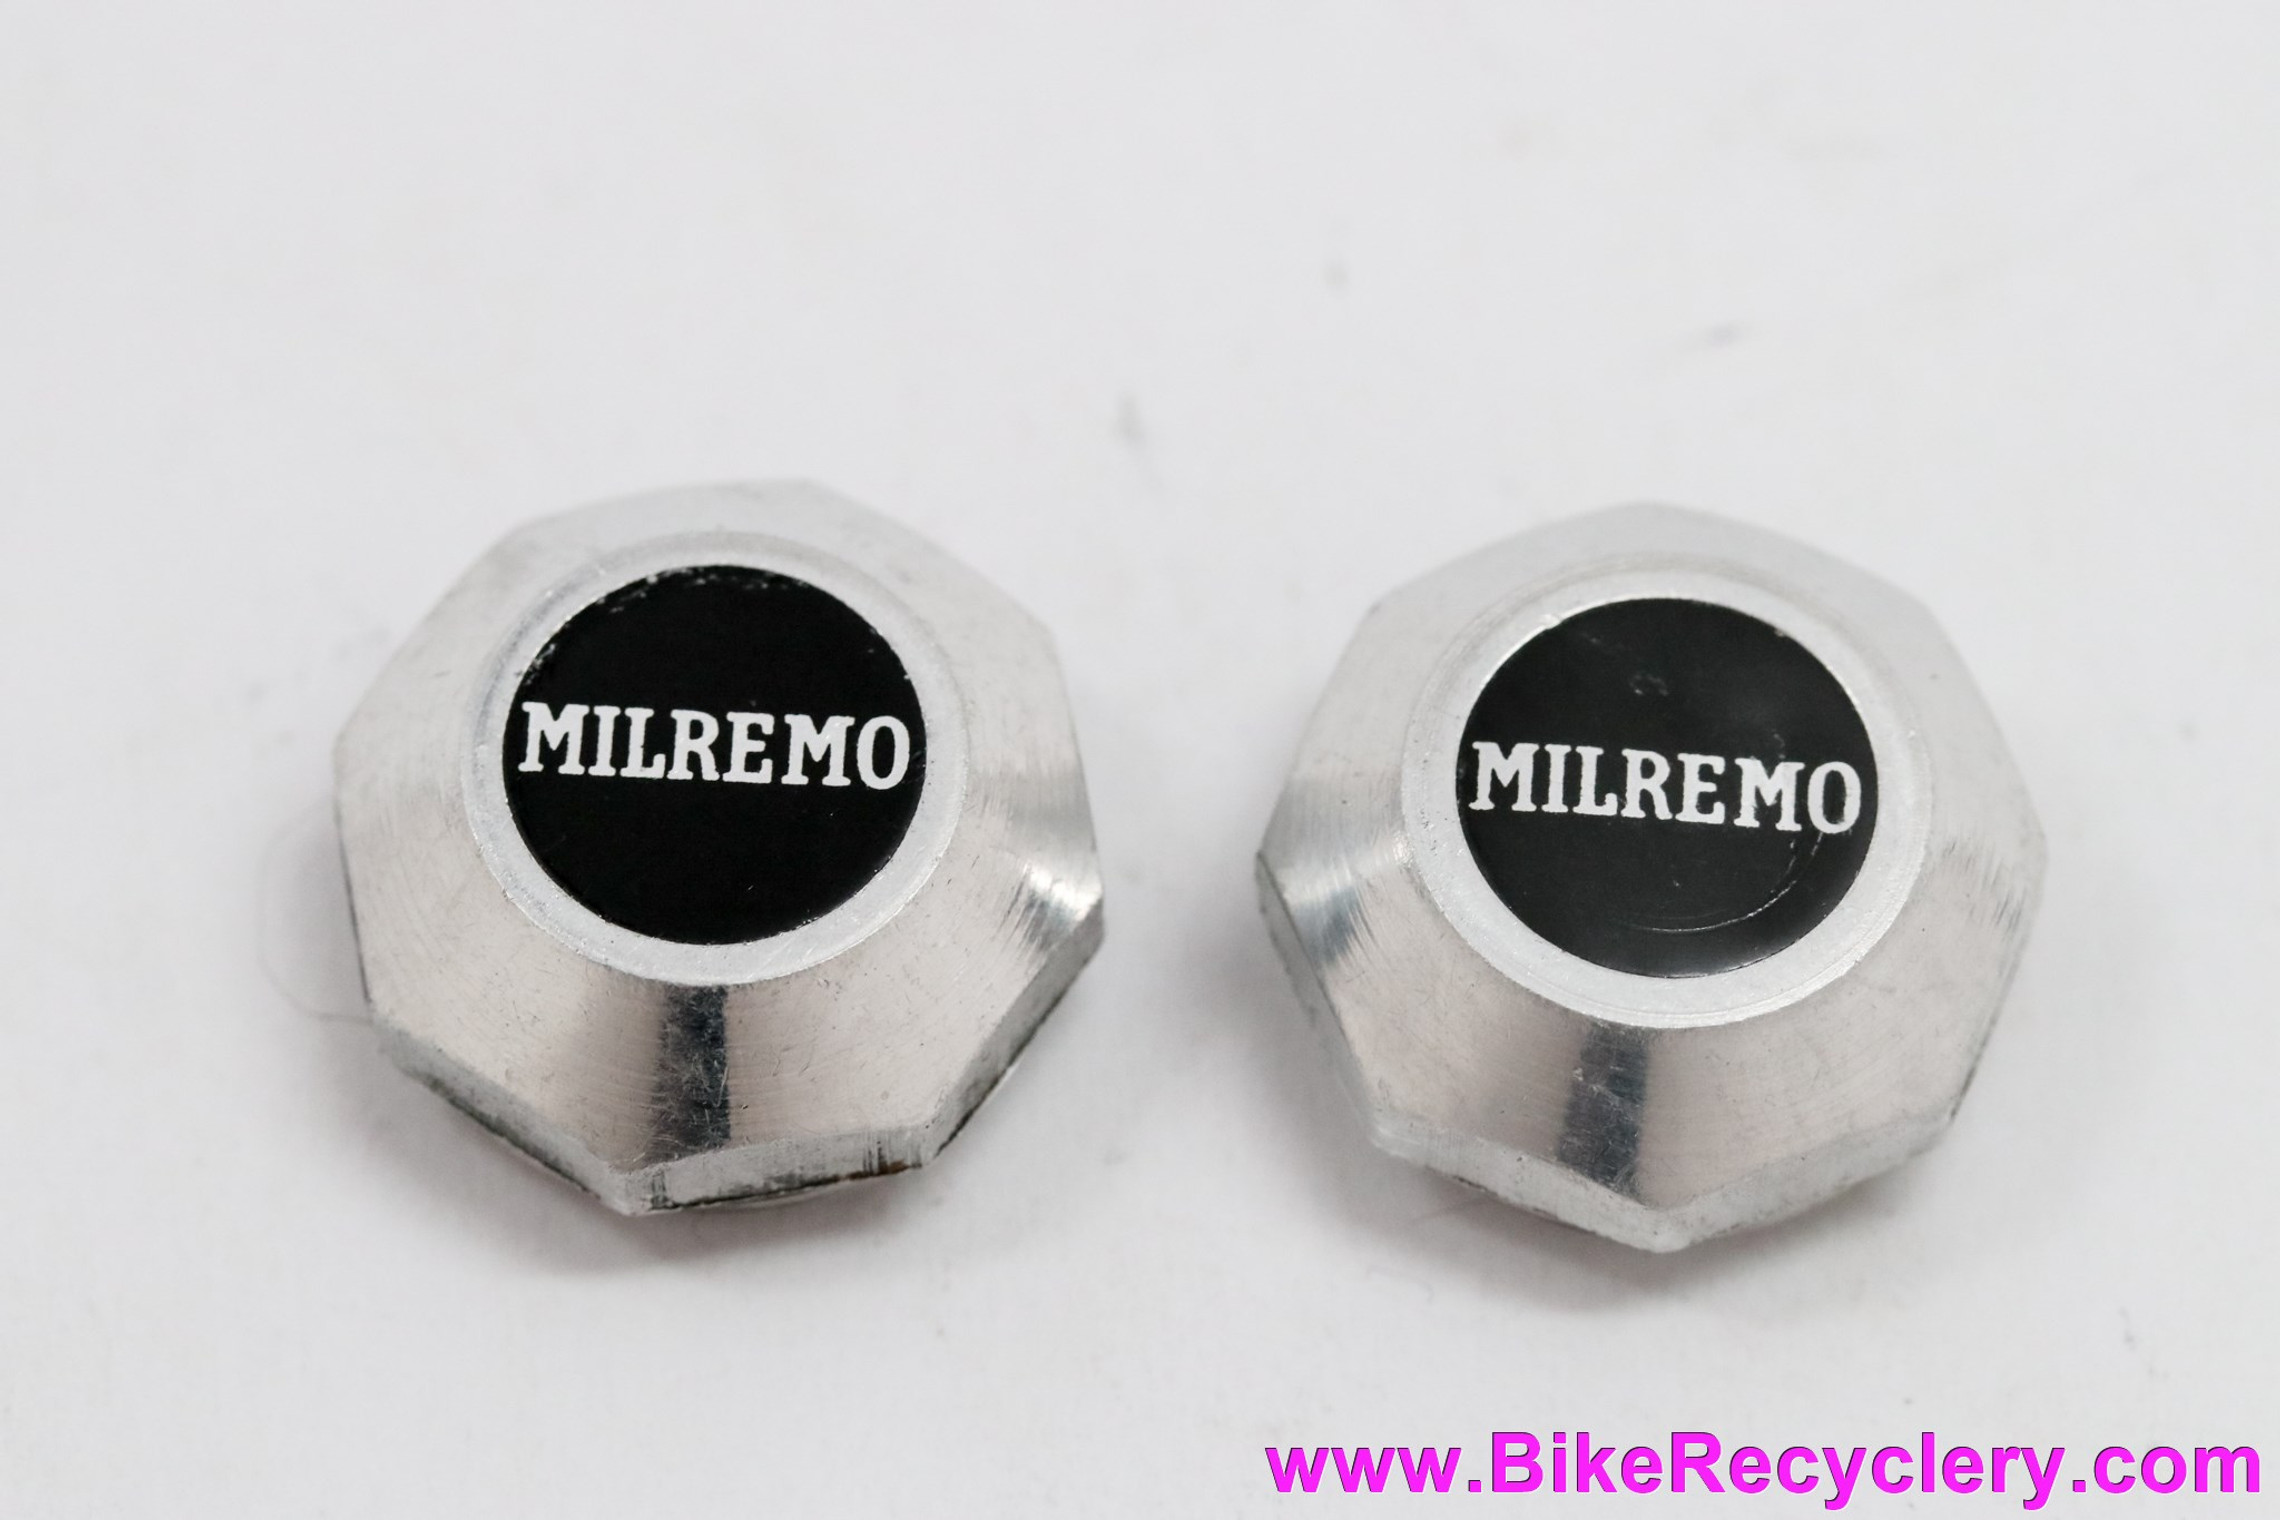 Milremo Super Competition Pedal Dust Caps: Made By Maillard (Atom 700) or Lyotard